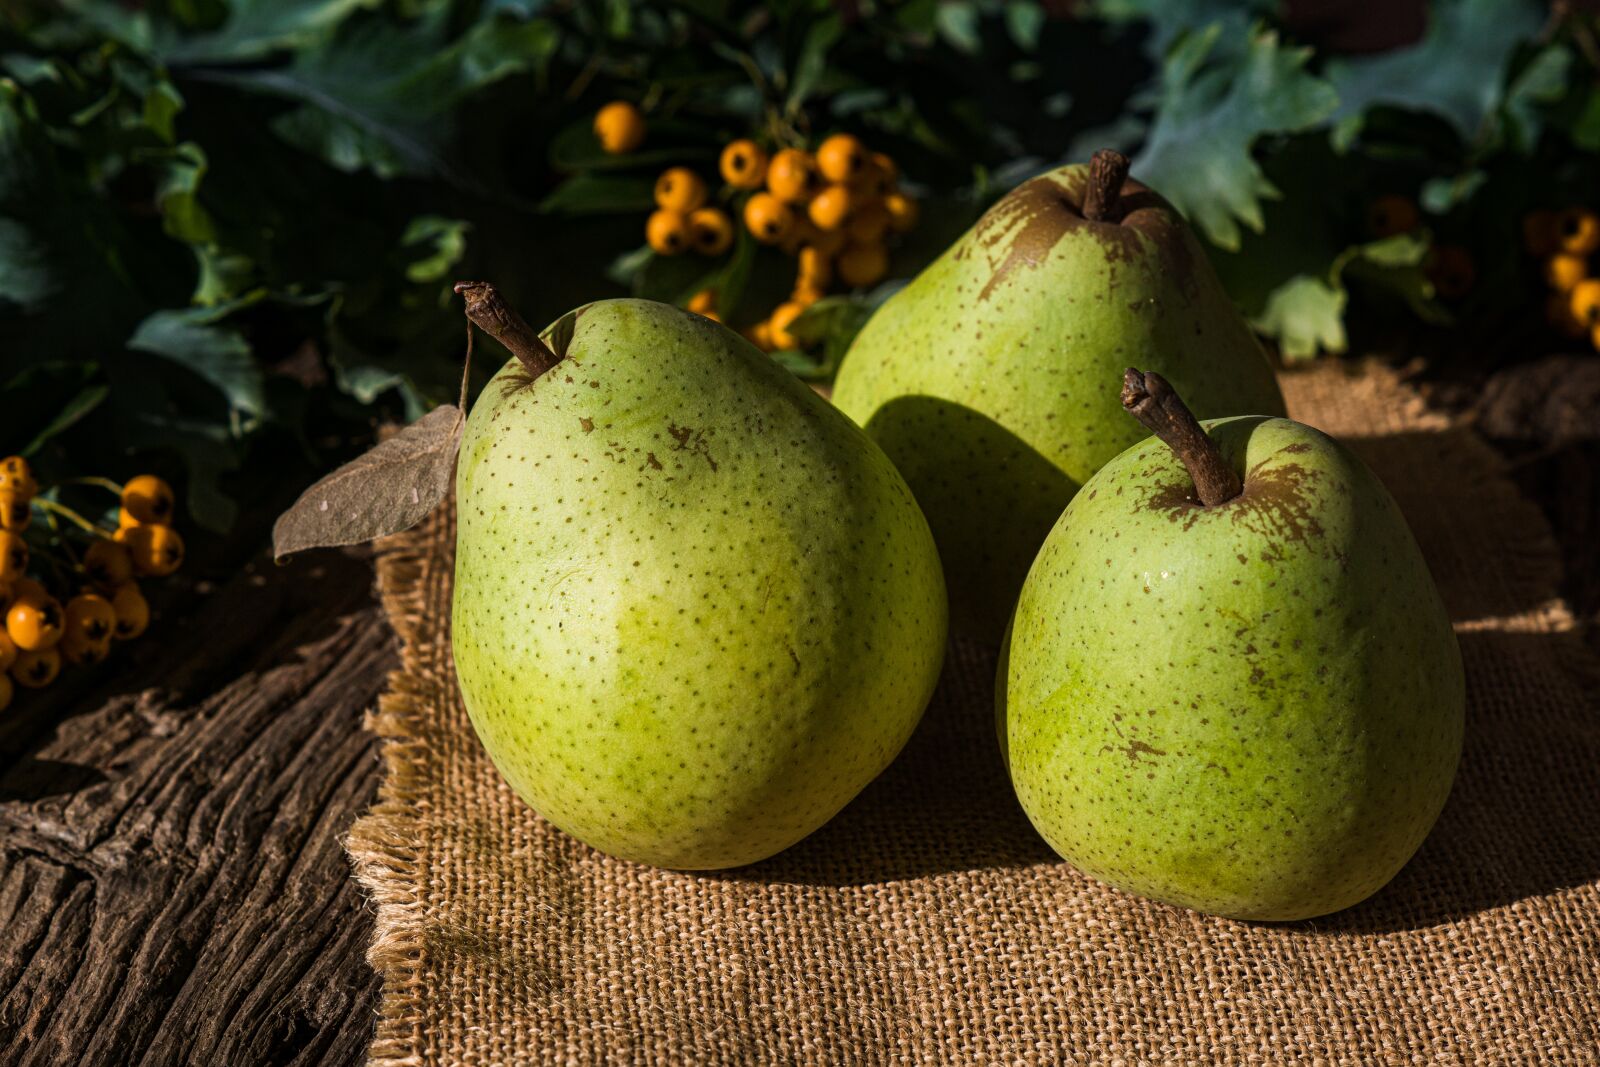 Sony DT 50mm F1.8 SAM sample photo. Pears, fruits, harvest photography